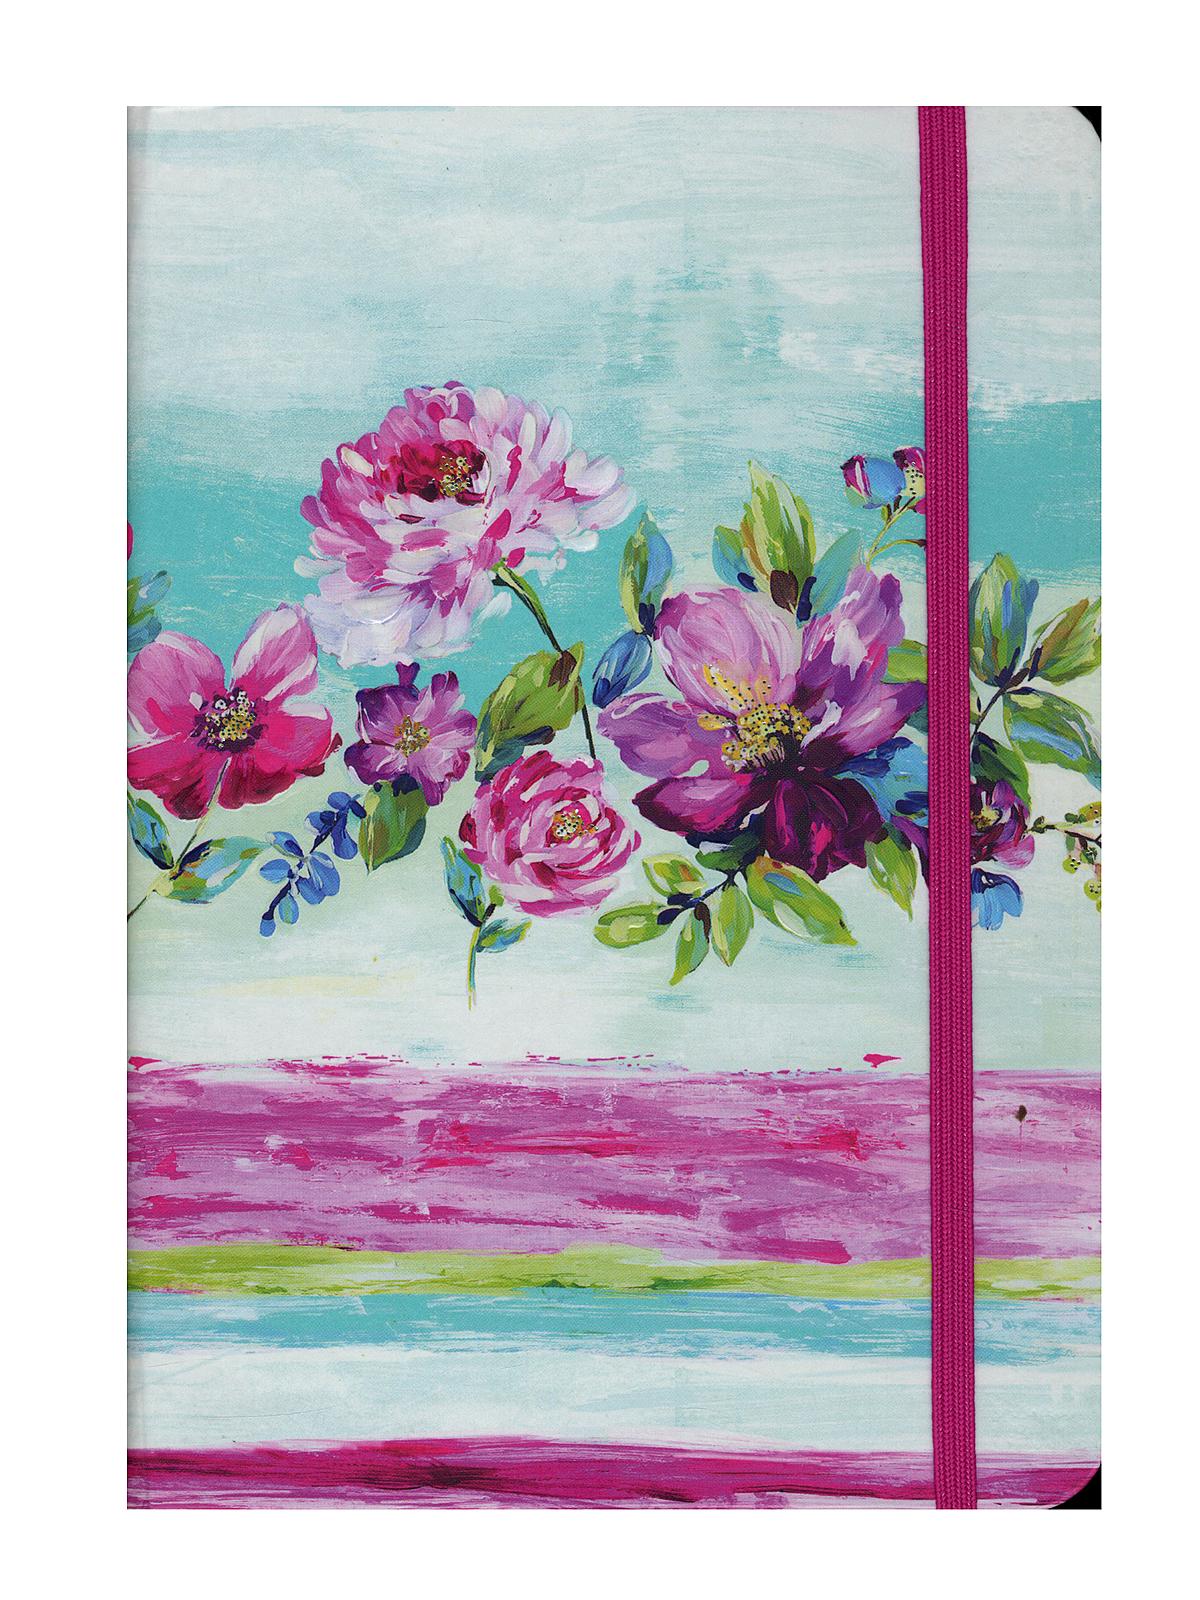 Small Format Journals Floral Spectrum 5 In. X 7 In. 160 Pages, Lined